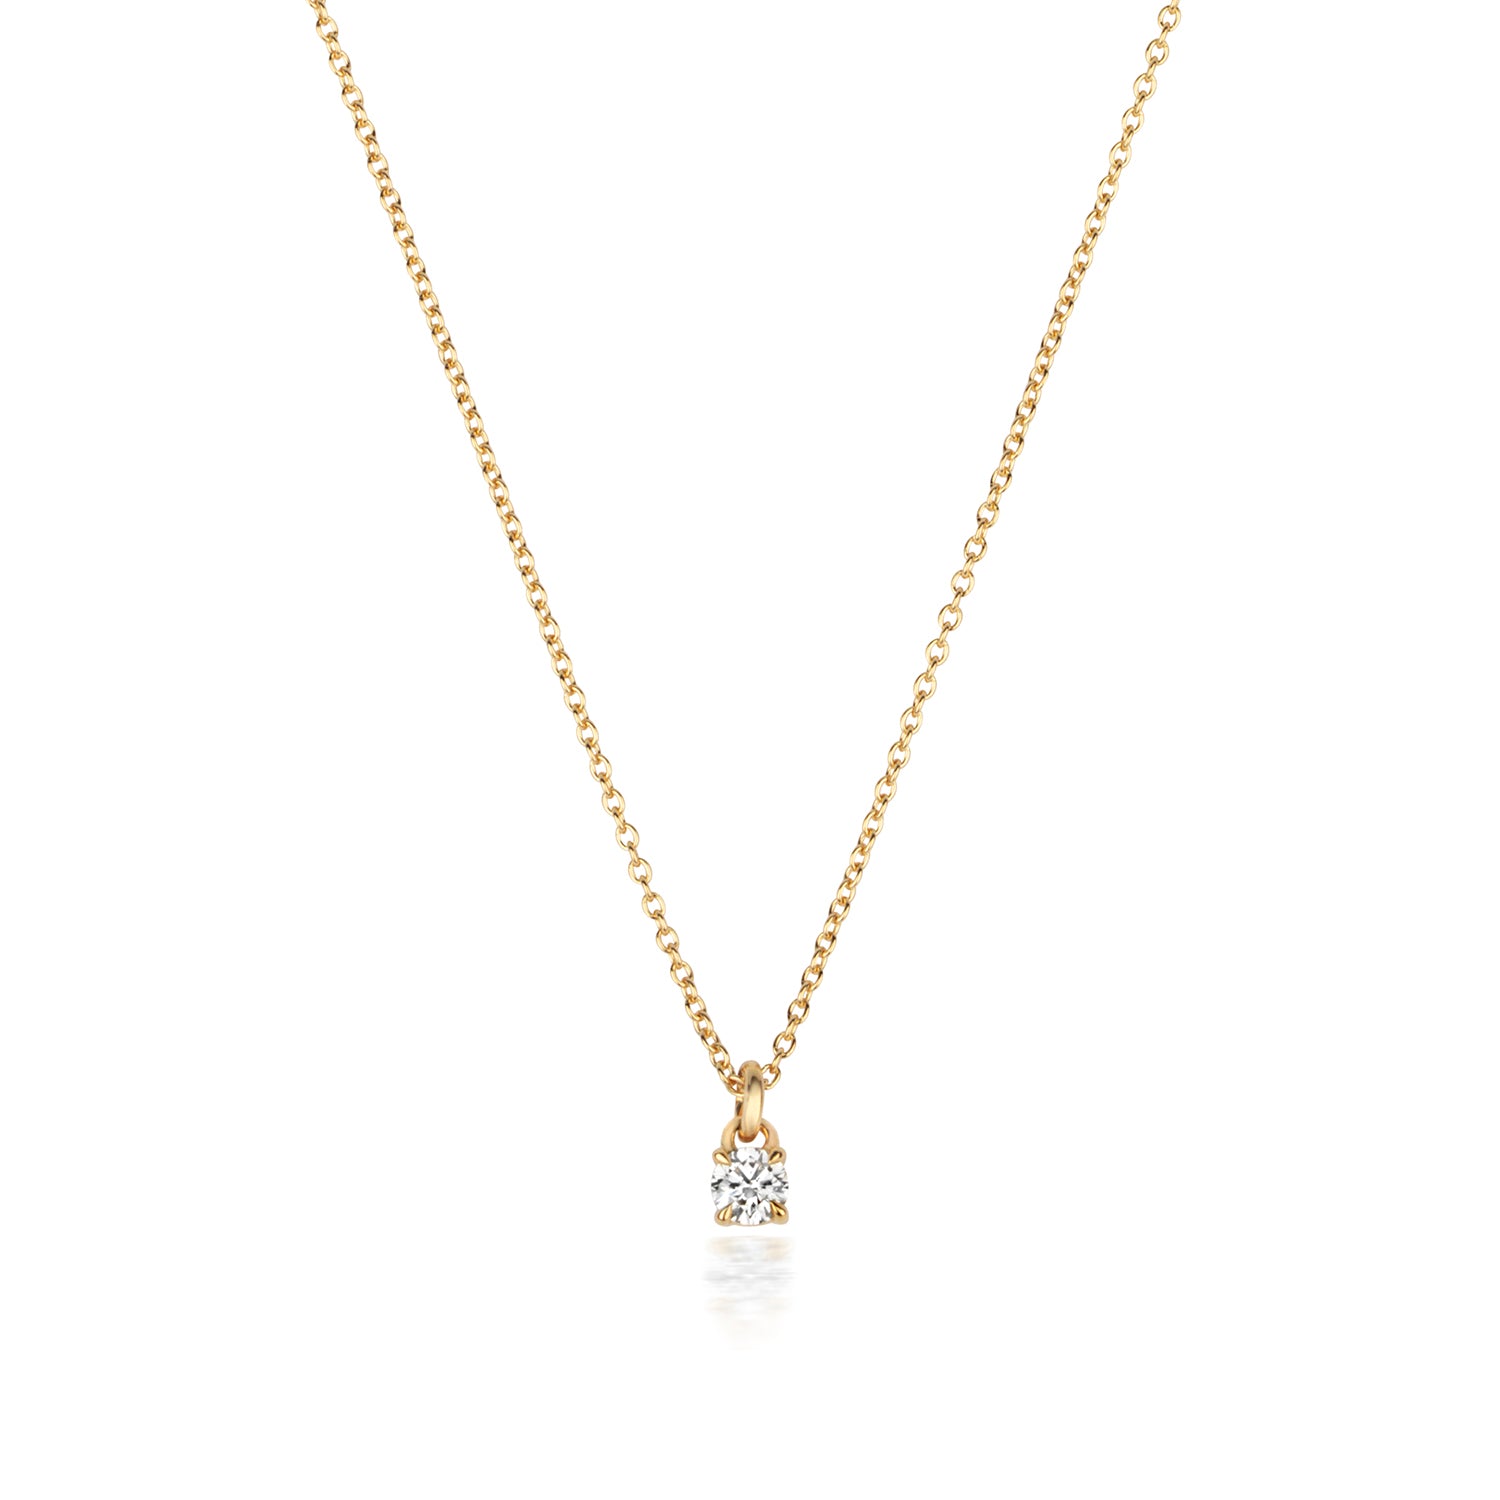 DIAMOND 4 CLAW NECKLACE IN 18 CT GOLD